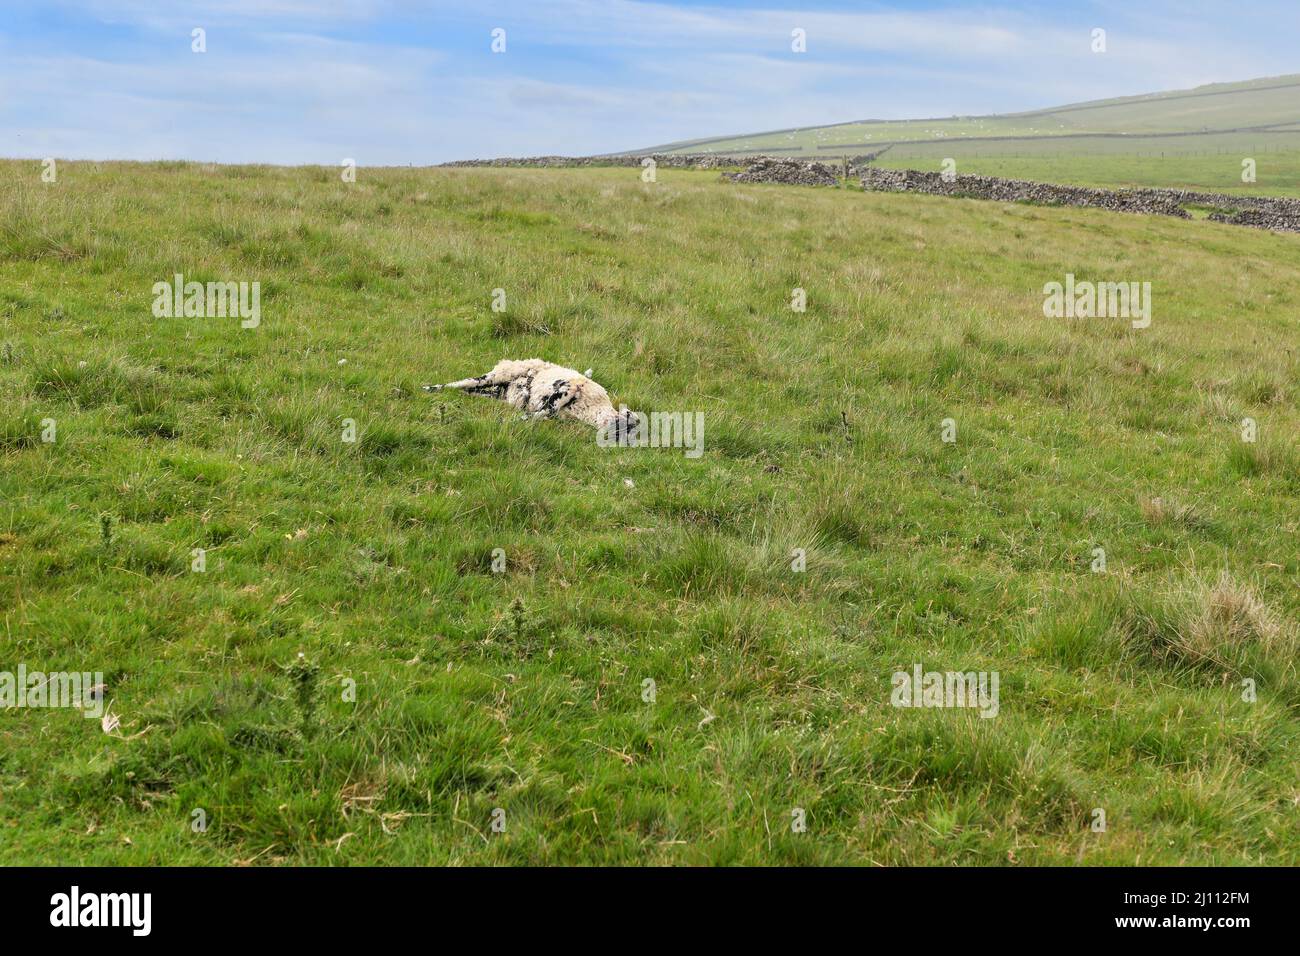 A dead sheep in a field that is decomposing and has been partly eaten by animals Stock Photo